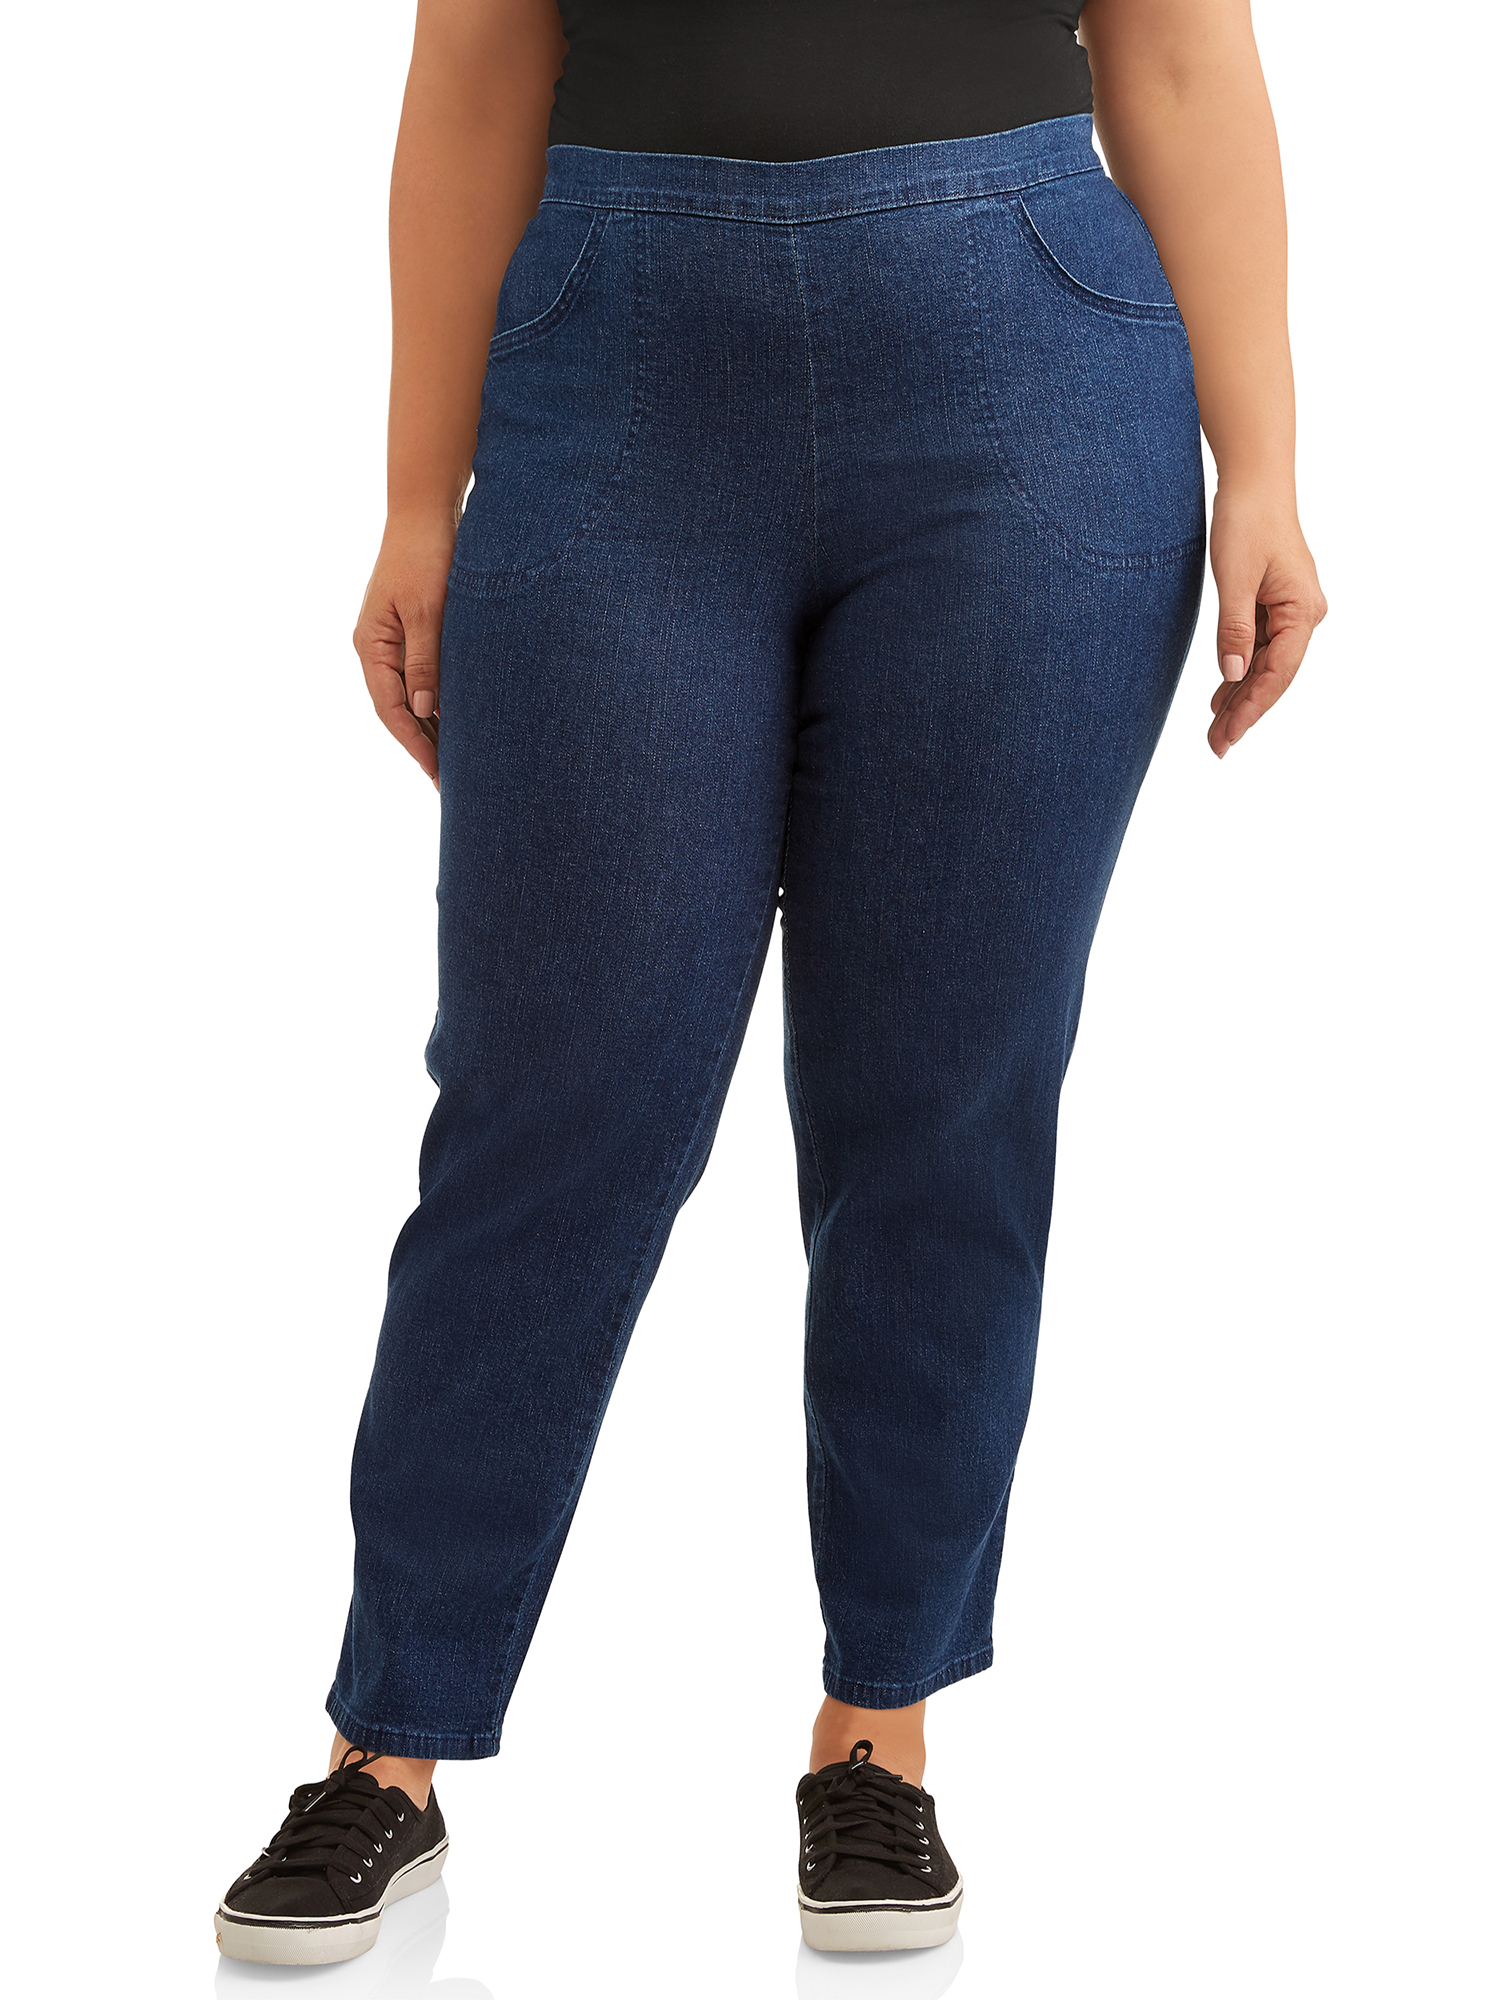 Just My Size Women's Plus Size 2 Pocket Pull On Pant, 2-Pack - image 2 of 7